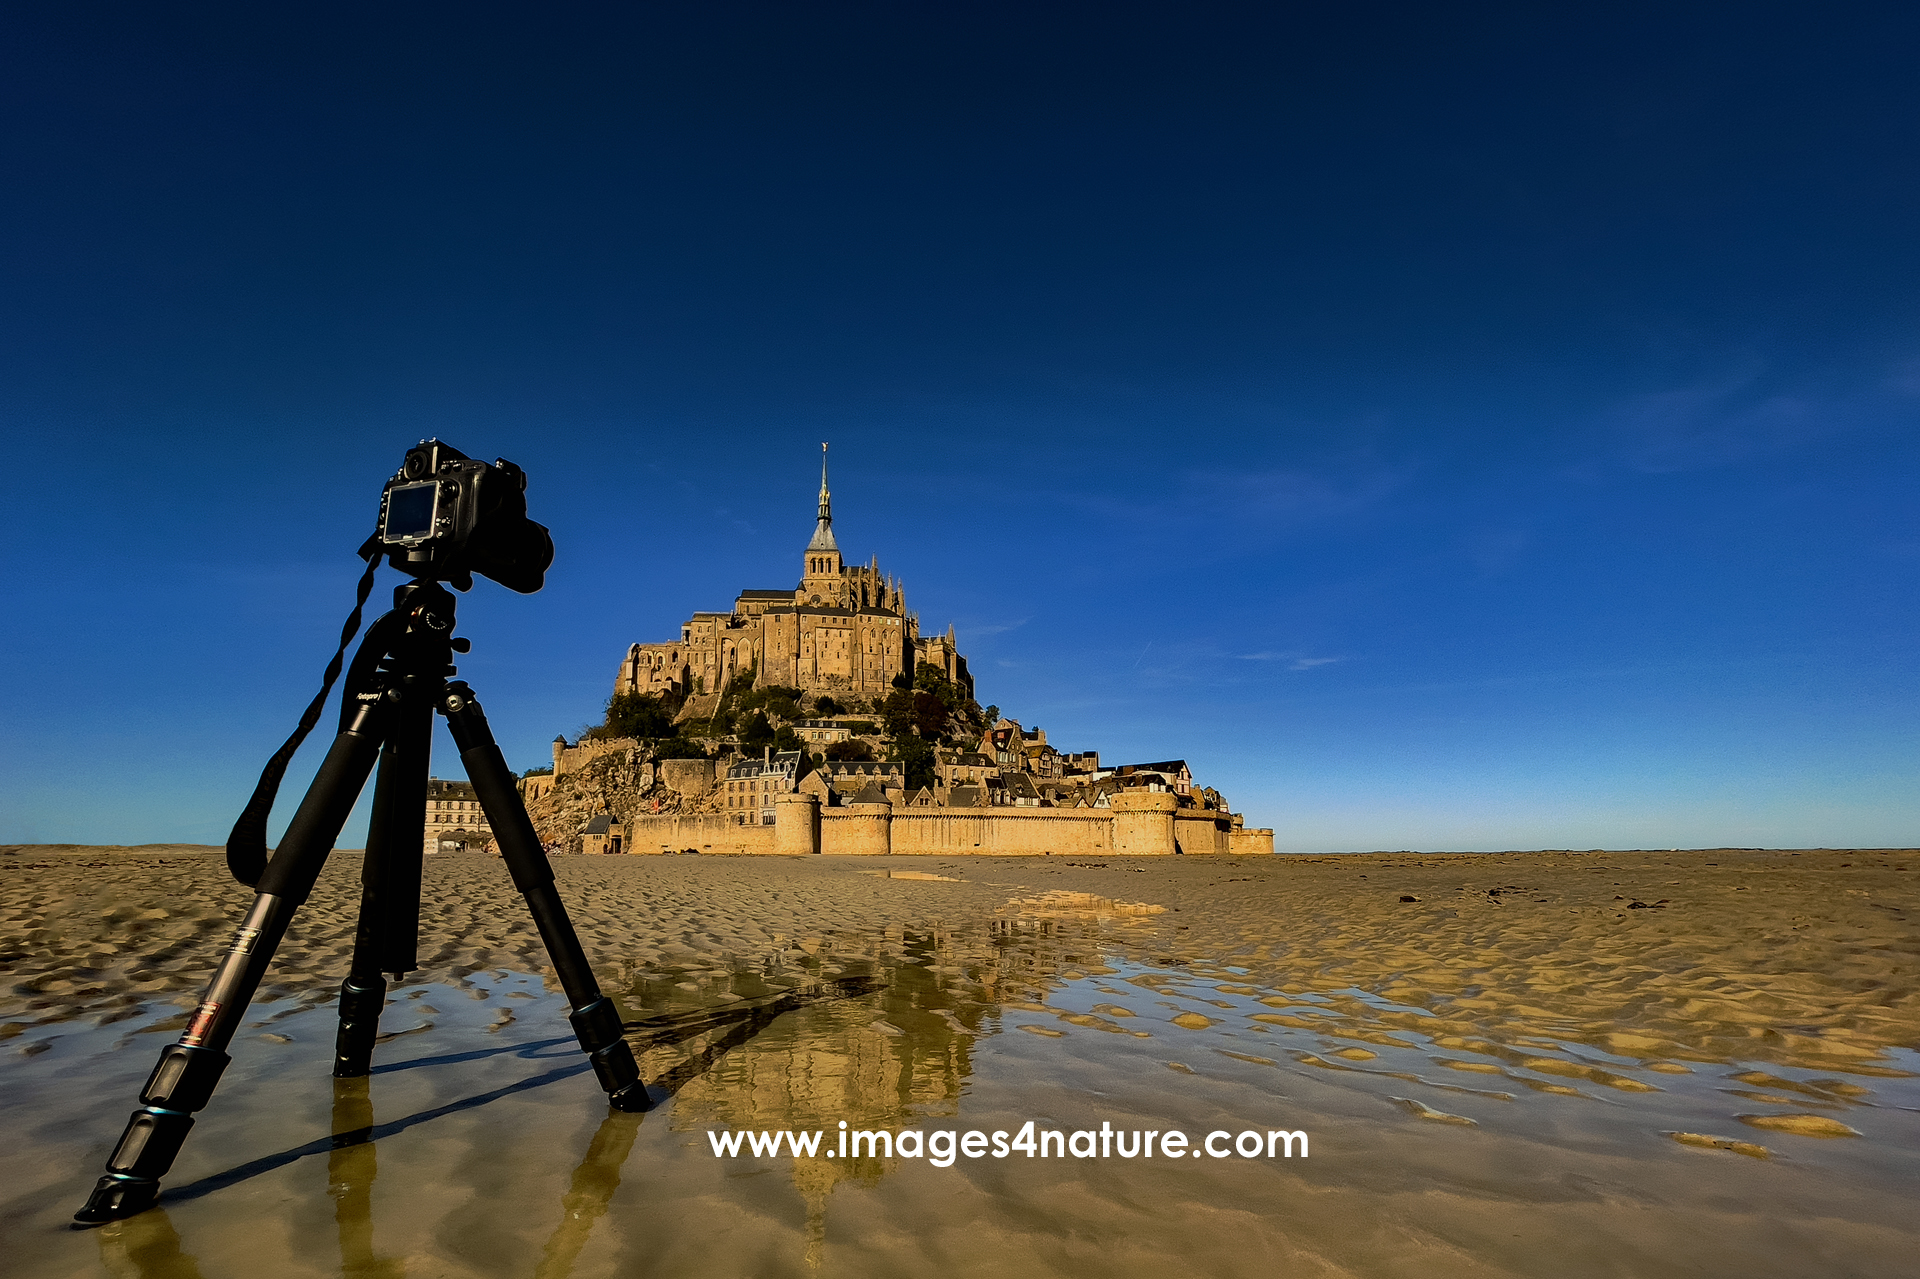 There are definitely worse days at the office than this  Walking around World Heritage Site  Mont Saint Michel  during ebb tide with this kind of weather and relatively few tourists was absolute fun   France, Mont Saint Michel, October 2022   Image ID 202210 FR 24